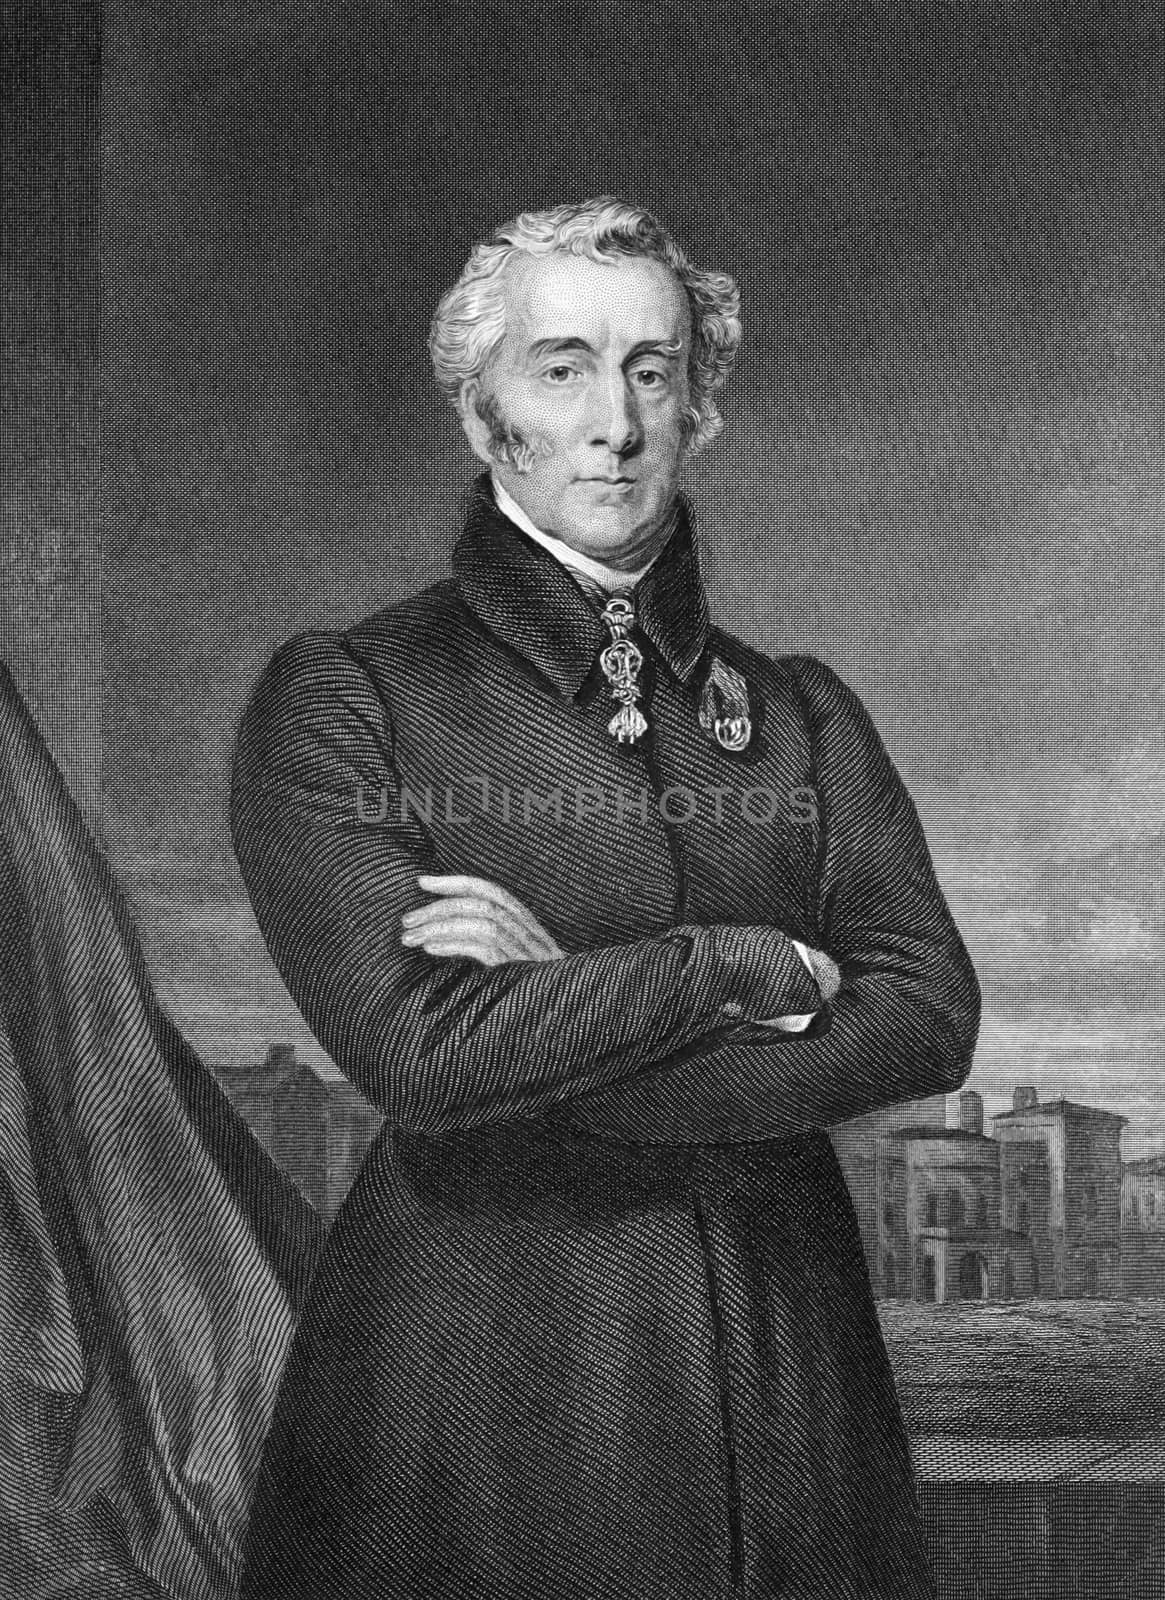 Arthur Wellesley, 1st Duke of Wellington (1769-1852) on engraving from 1873. British soldier and statesman. Engraved by unknown artist and published in ''Portrait Gallery of Eminent Men and Women with Biographies'',USA,1873.
